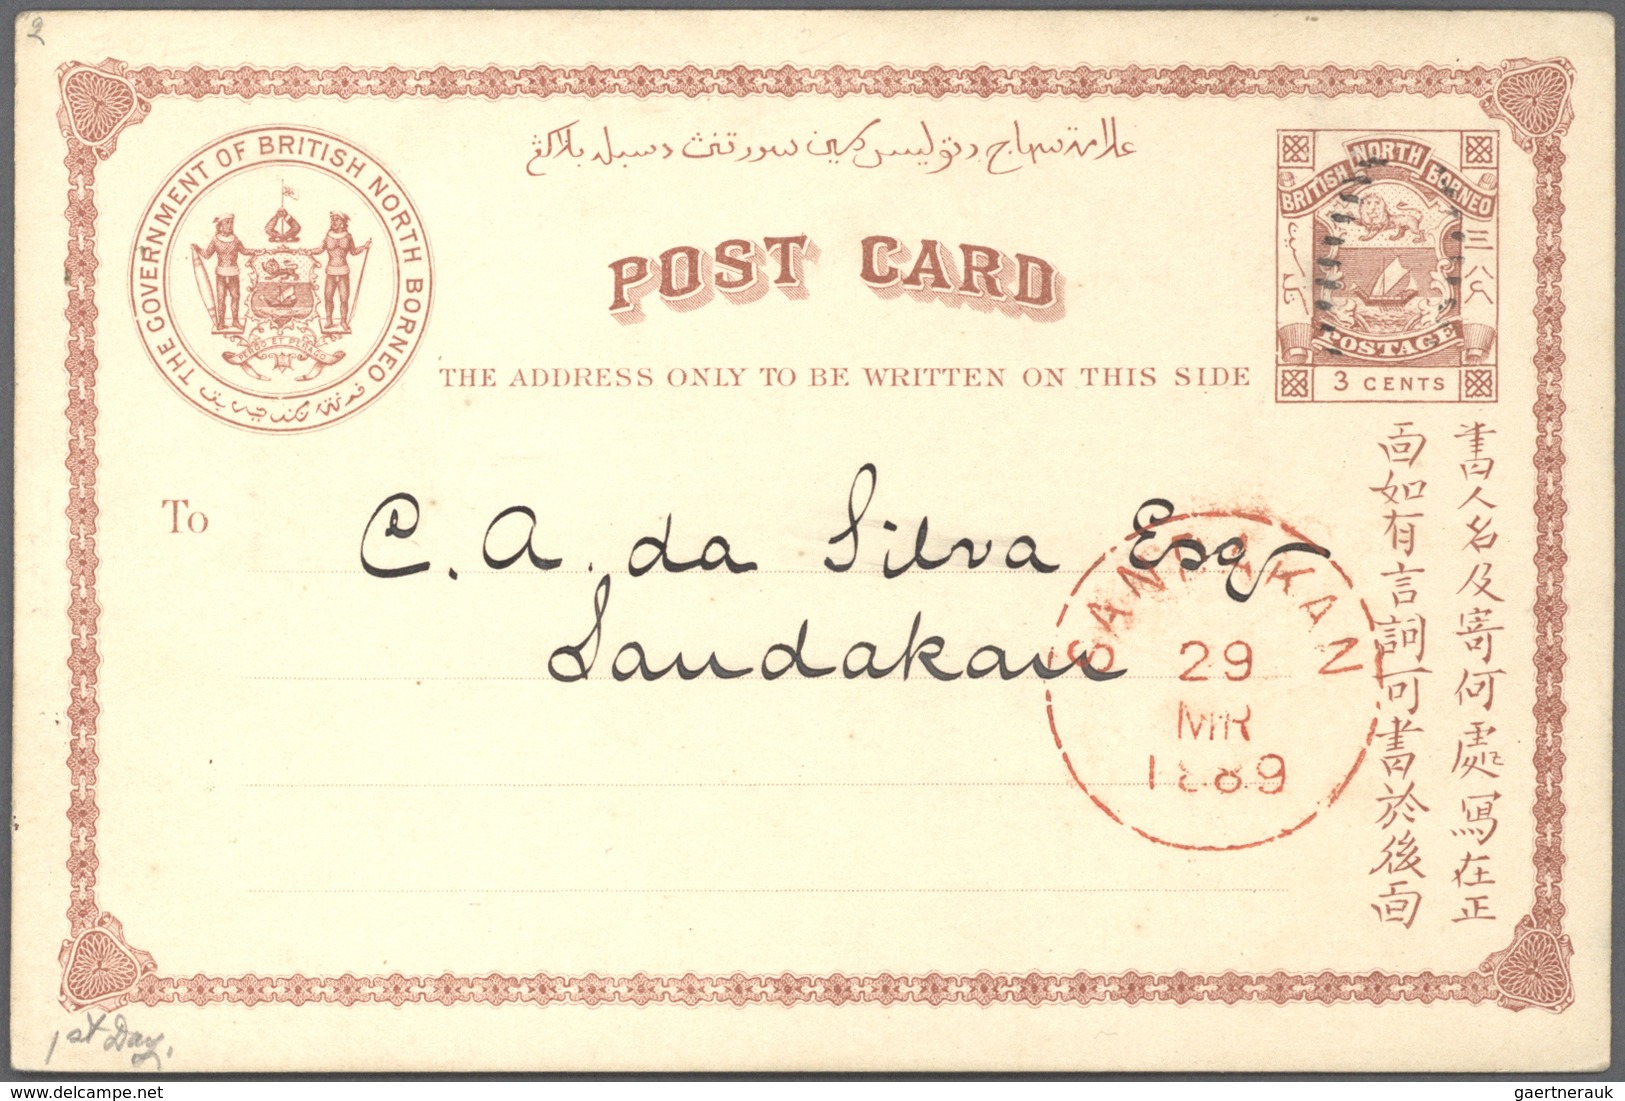 Nordborneo: 1889 complete set of postal stationery postcards with postmark of the first day sent and